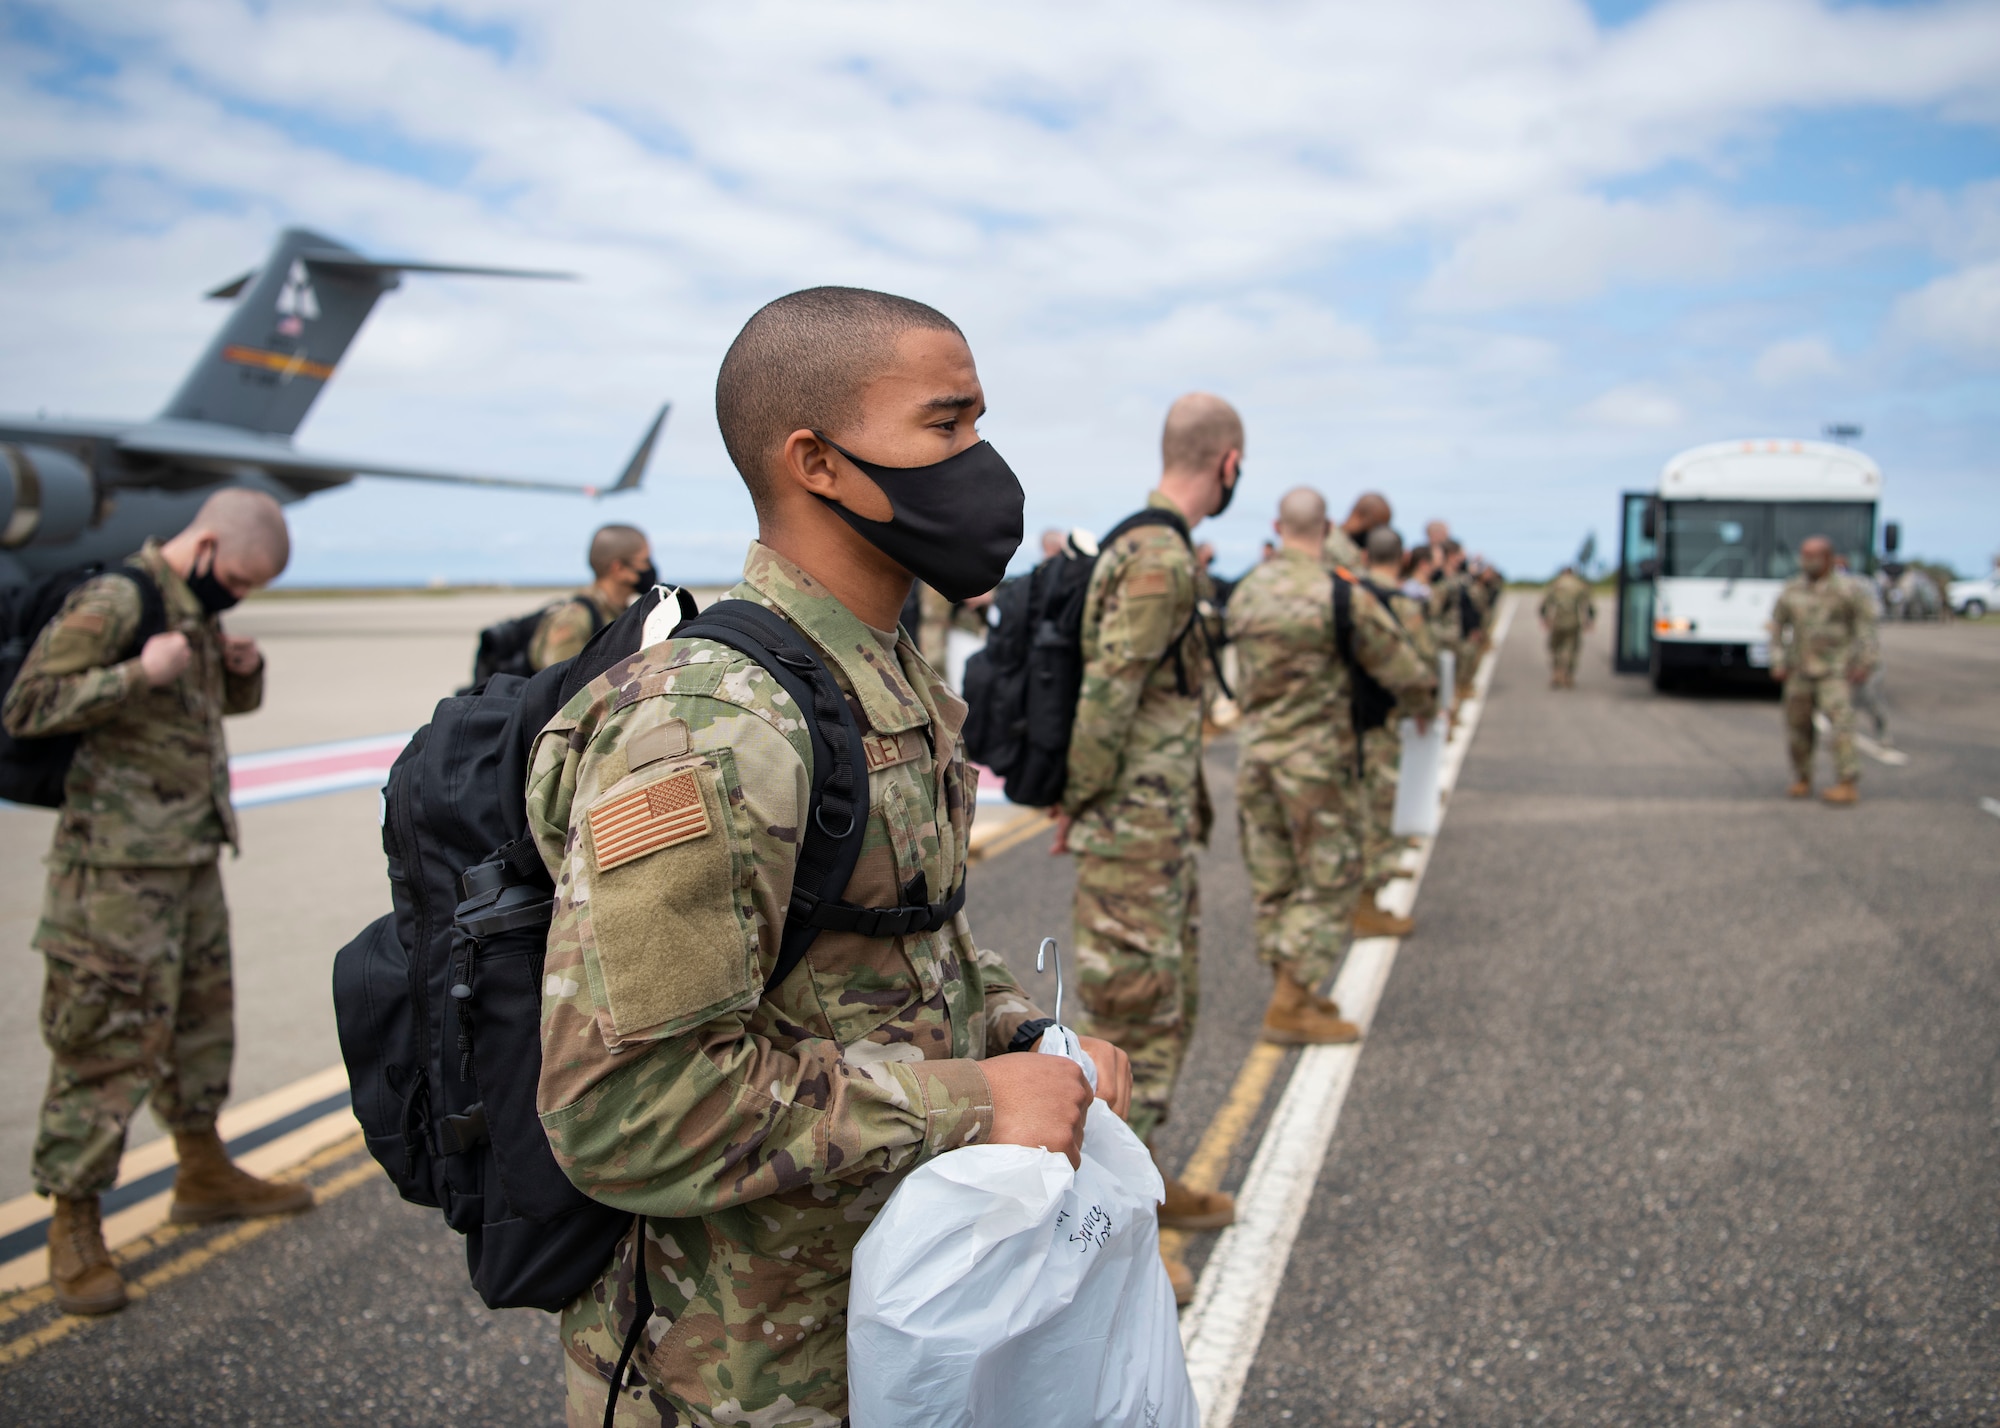 Airmen from Basic Military Training stand in formation on the flightline after getting off a C-17 April 17, 2020, at Vandenberg Air Force Base, Calif. Typically, members leaving BMT from Joint Base San Antonio-Lackland, Texas, travel on commercial aircraft to get to their technical school locations. However, under current COVID-19 circumstances, the Airmen are flown on military aircraft to designated bases and transported to their tech school locations by bus. The students went through a 14-day quarantine at BMT prior to flying. (U.S. Air Force photo by Senior Airman Aubree Owens)